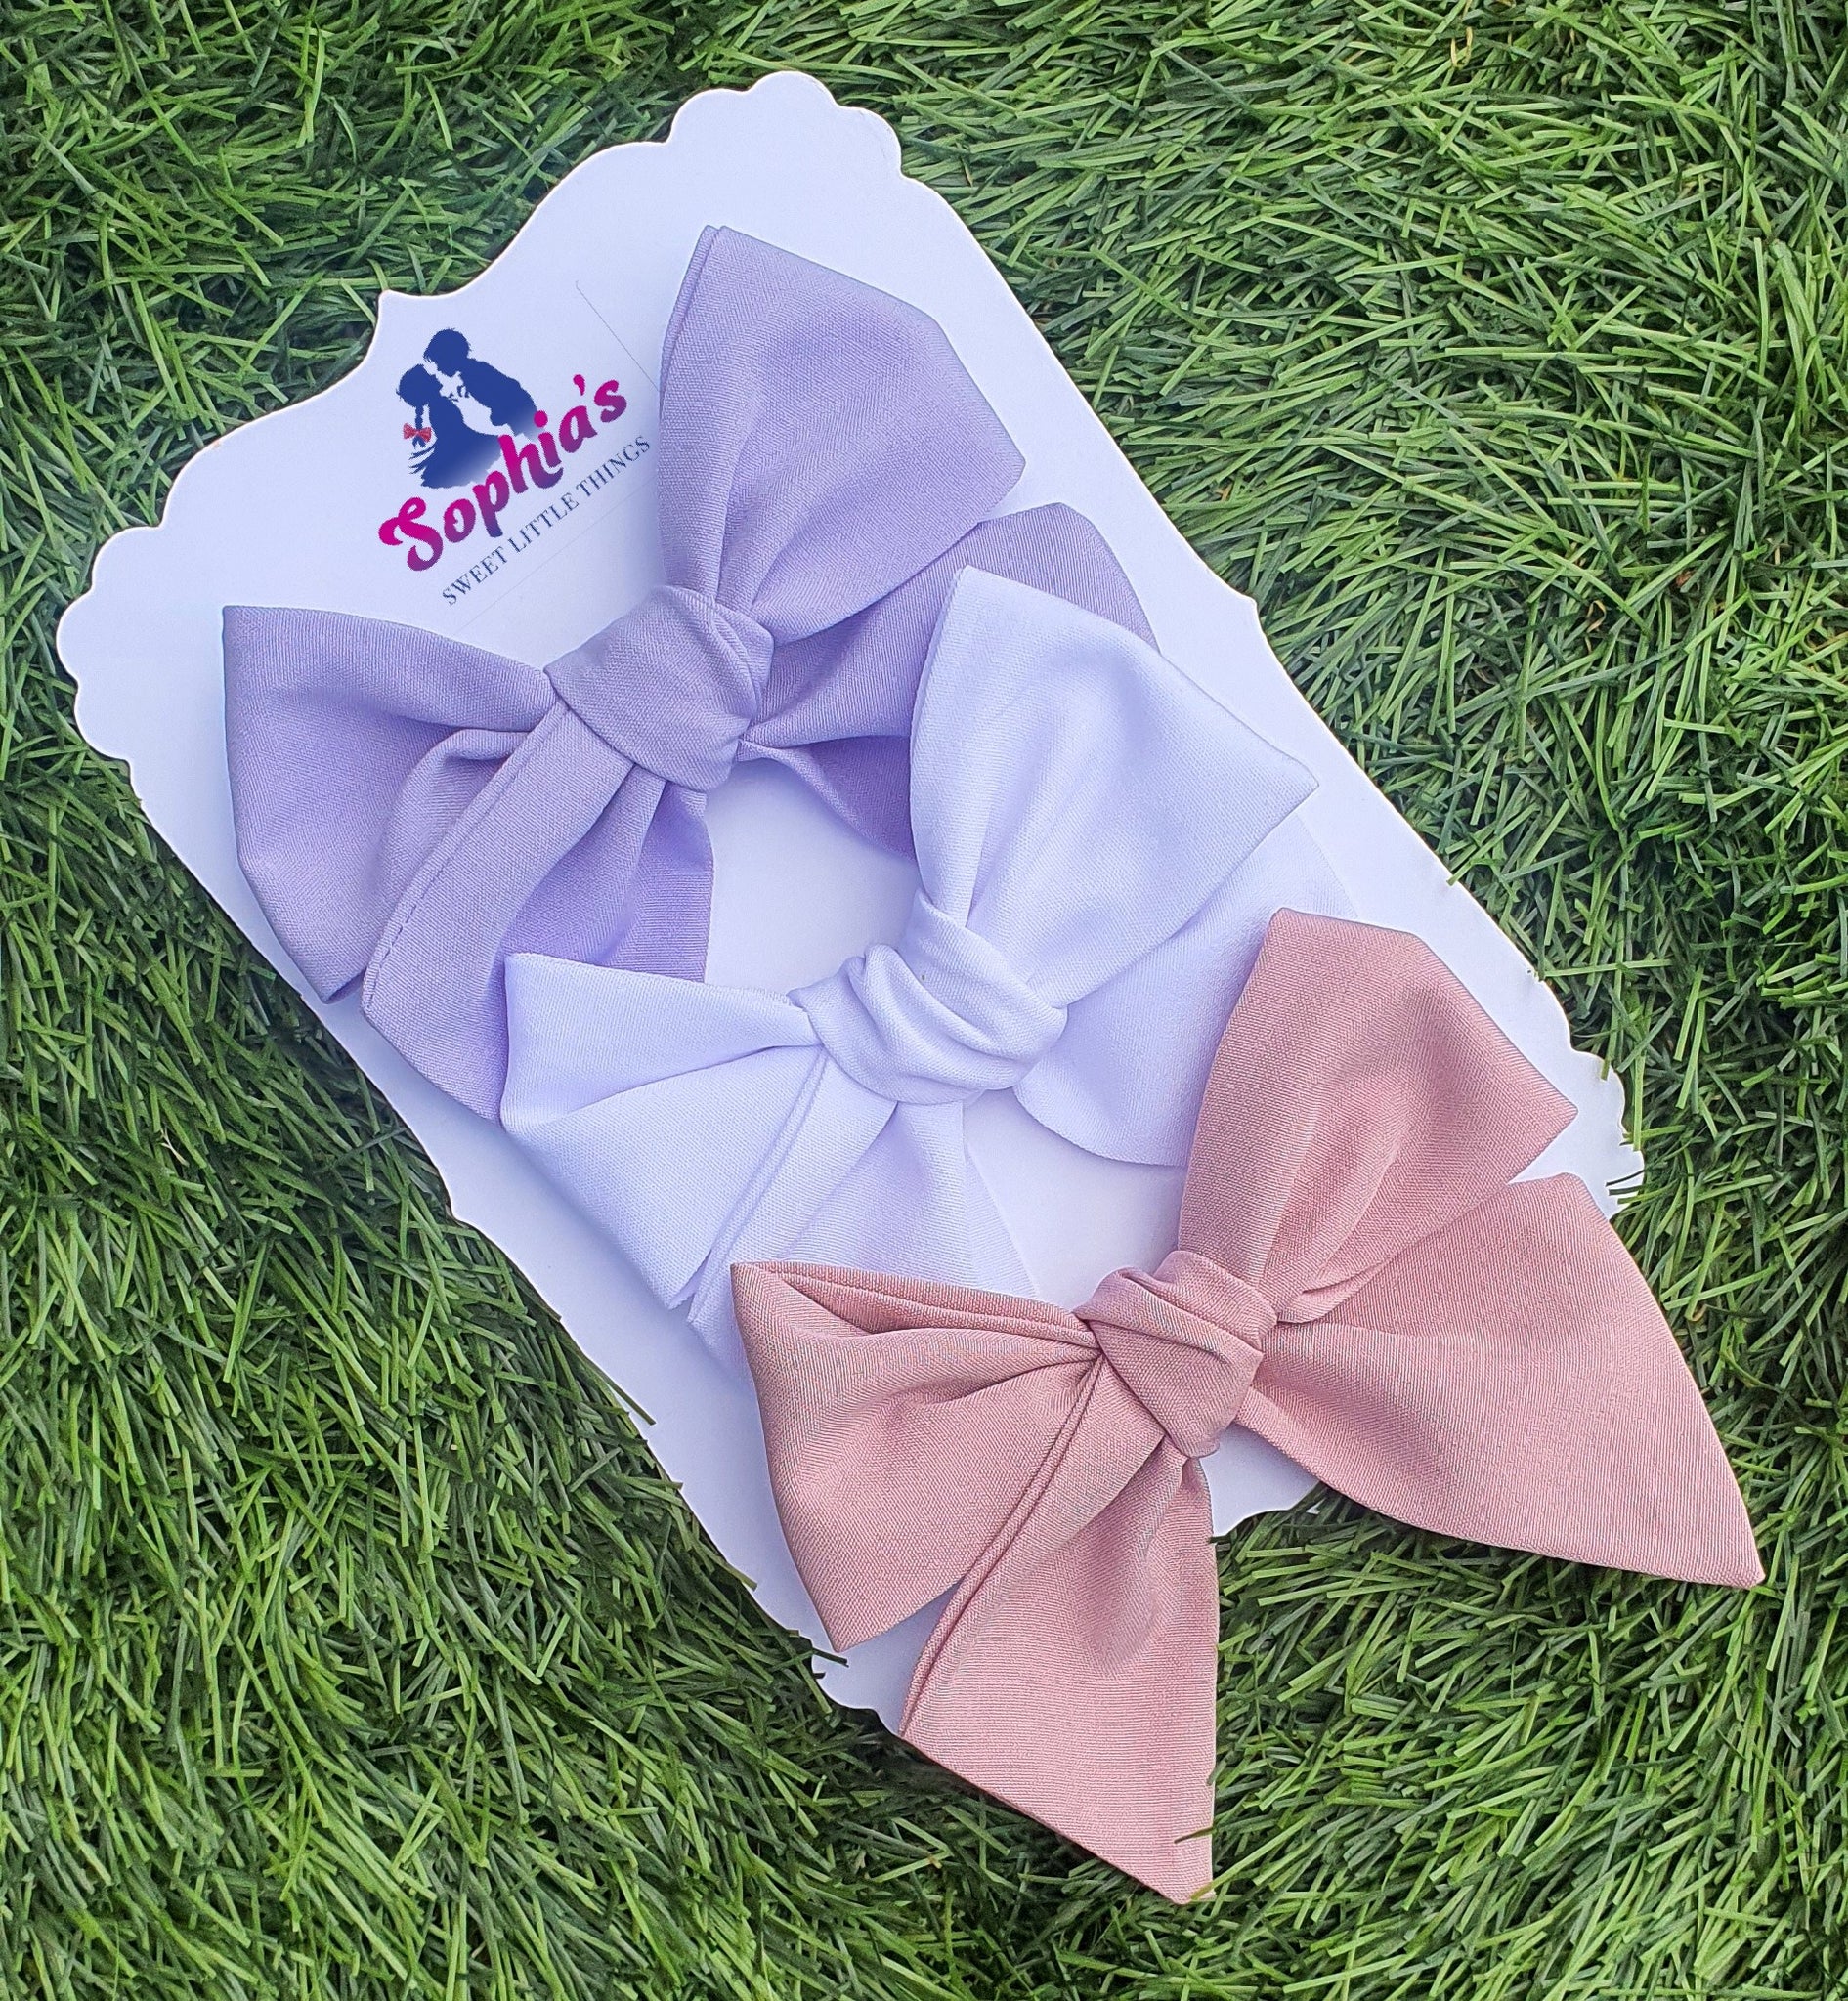 Mix tie knot bows